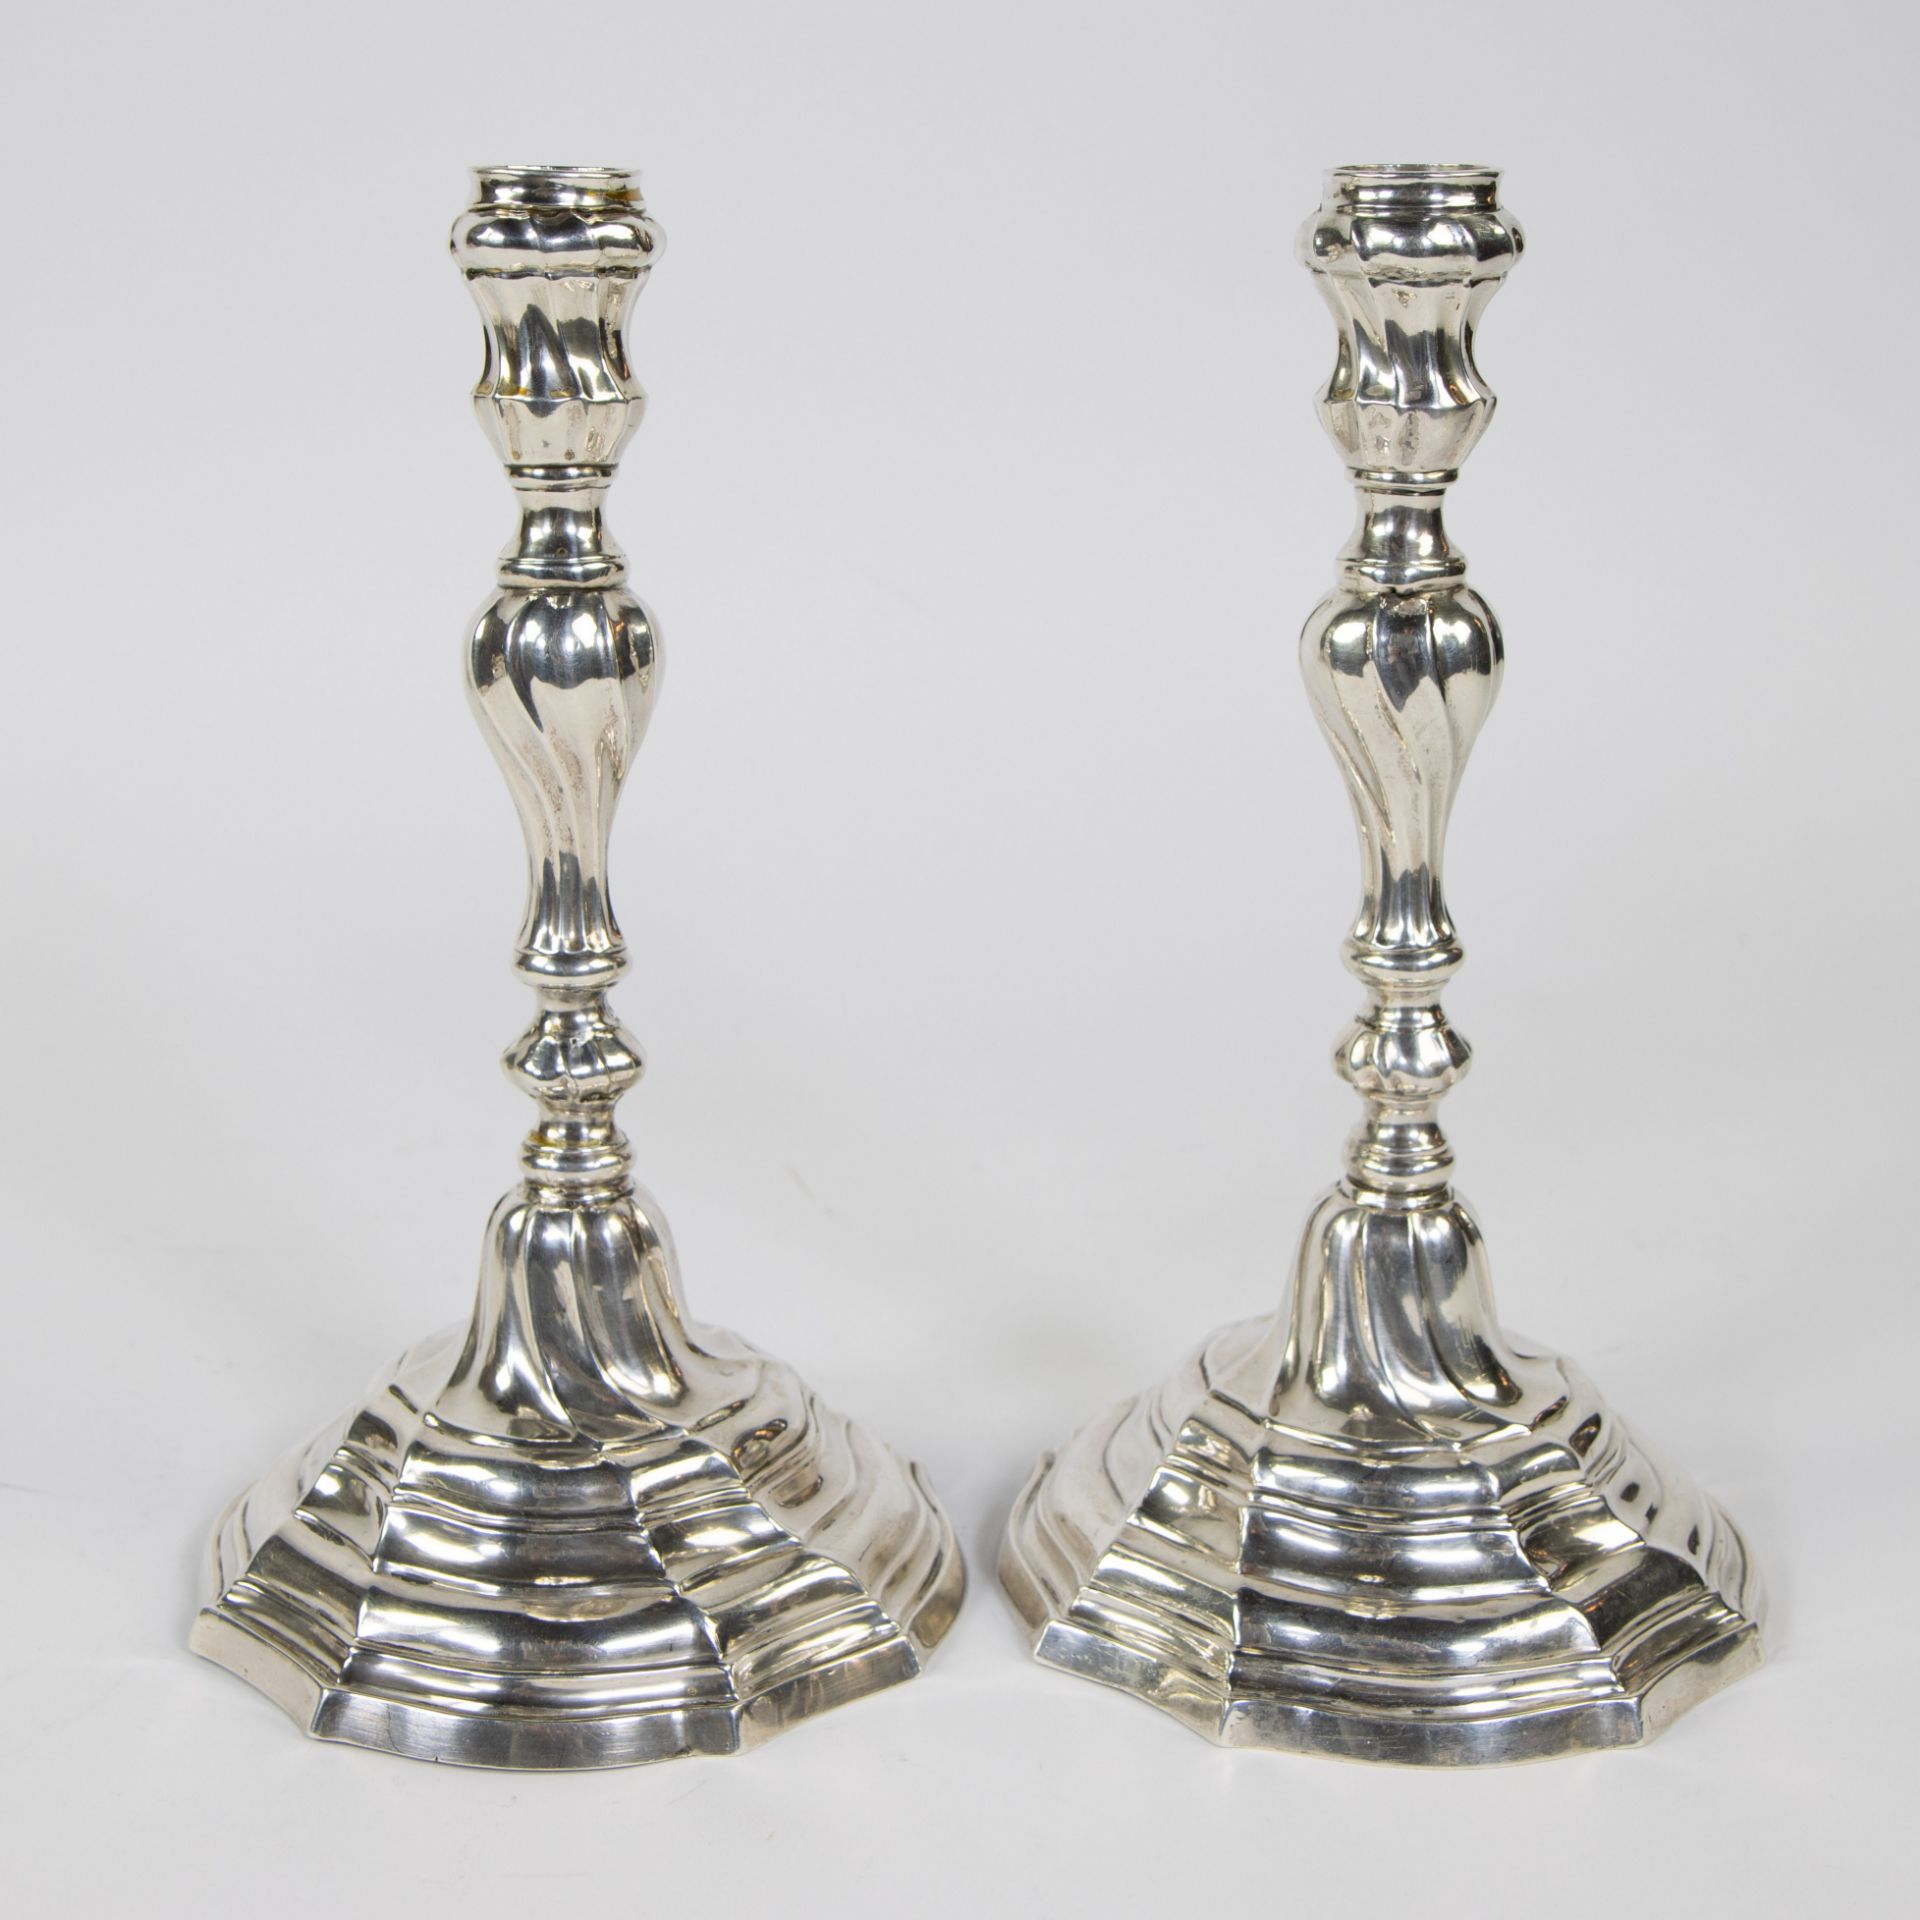 Ghent Louis XV candlesticks, twisted, silver 1774, silversmith Joannes Baptista Paulus